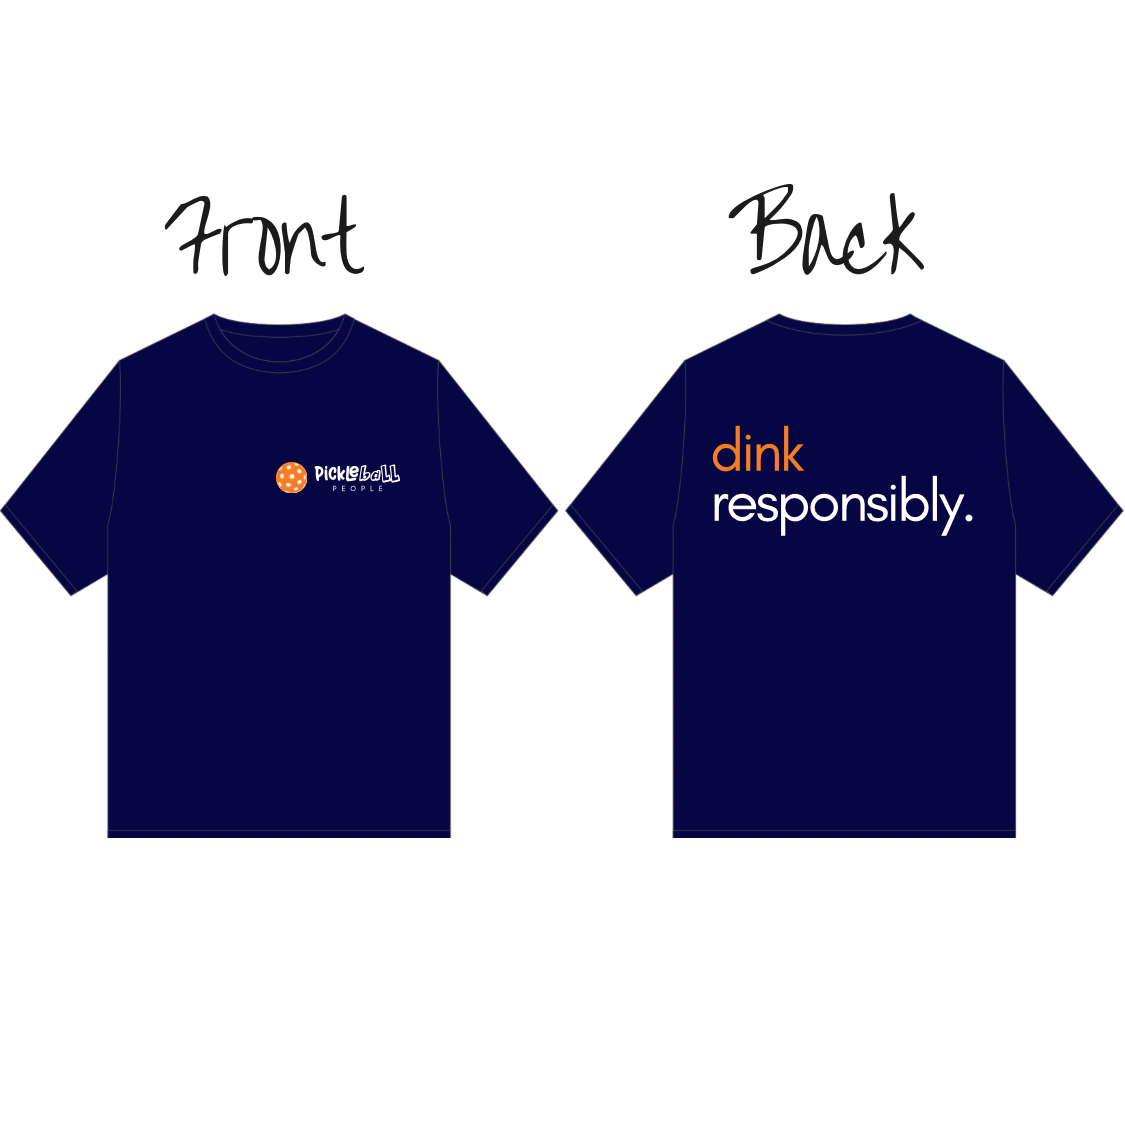 Featured image for “Pickleball People 'dink responsibly' T-shirt”